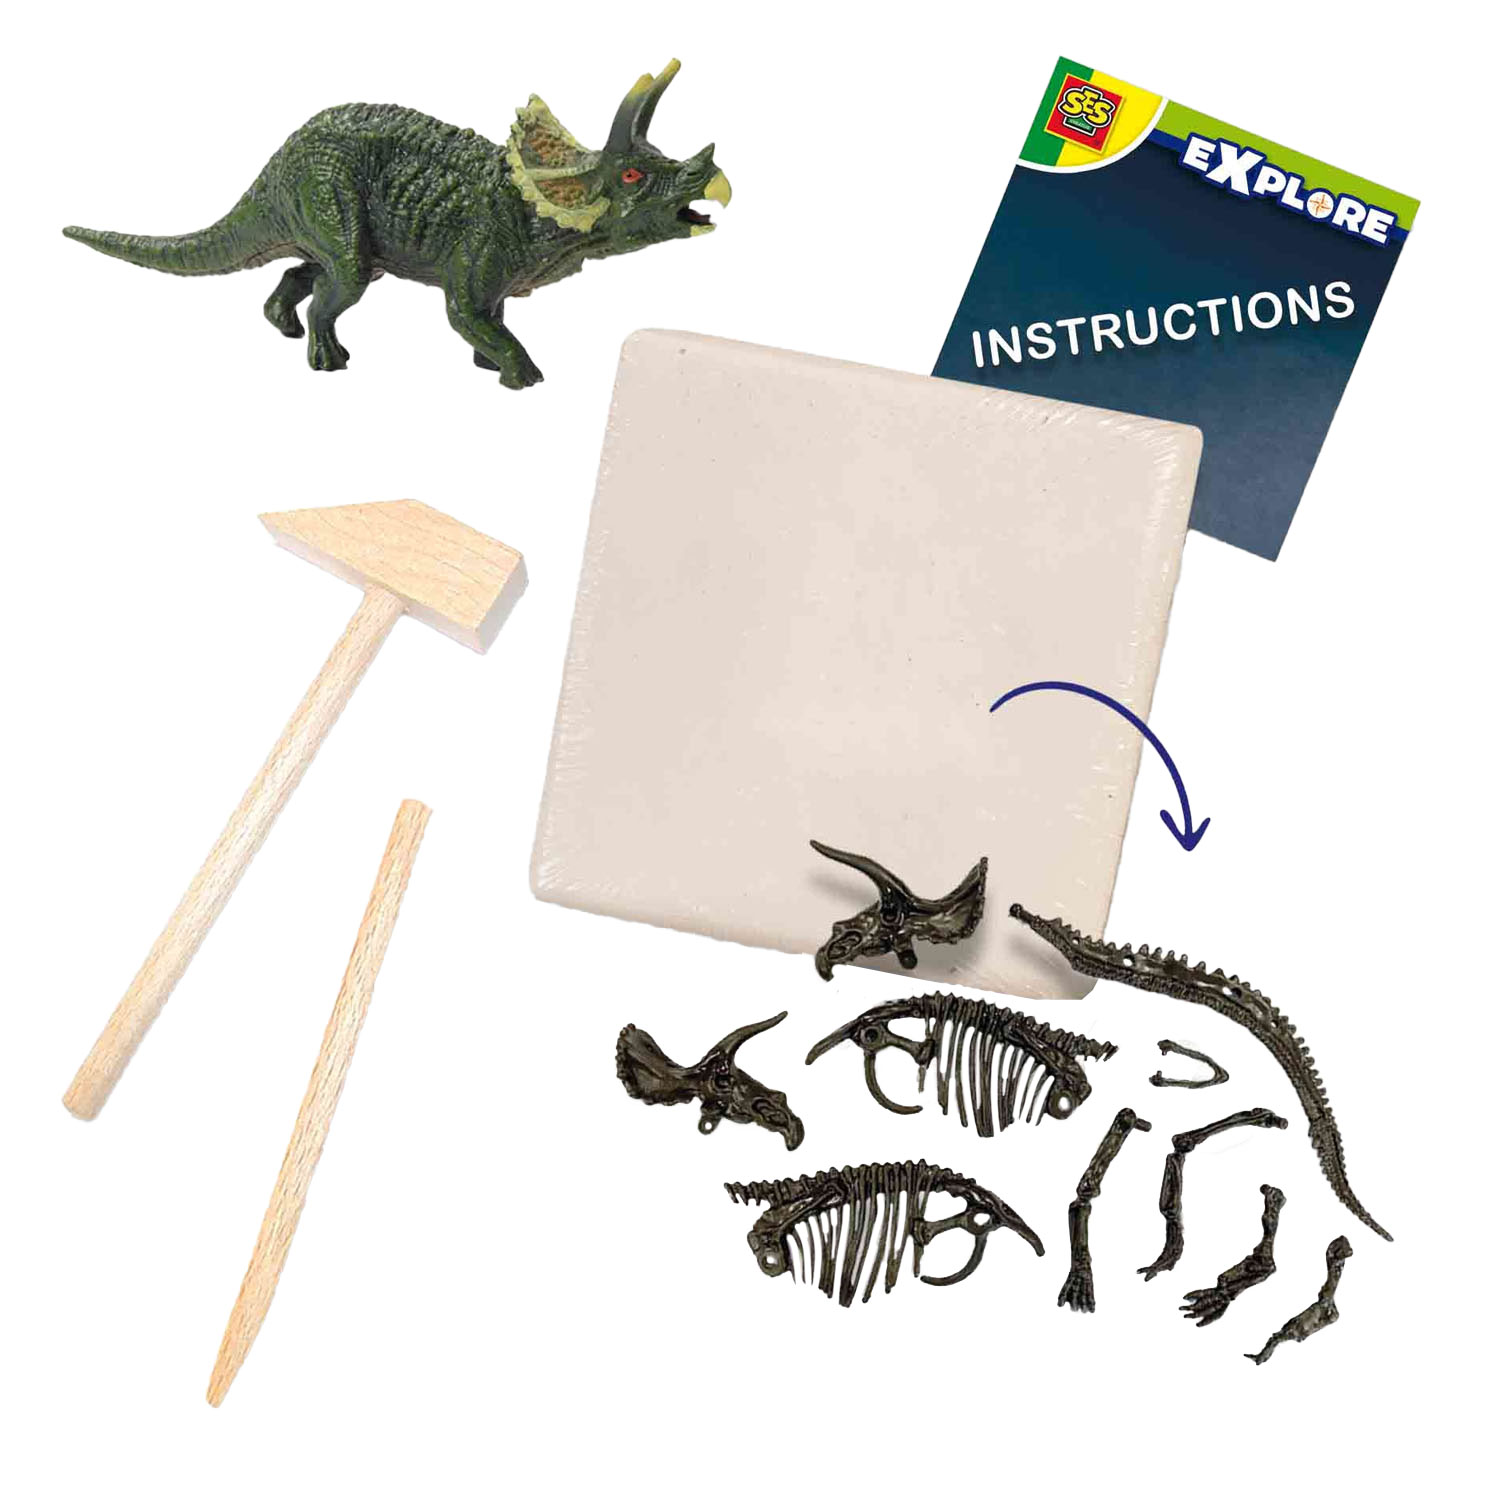 SES Explore Dino and Skeleton Dig 2in1 – Triceratops